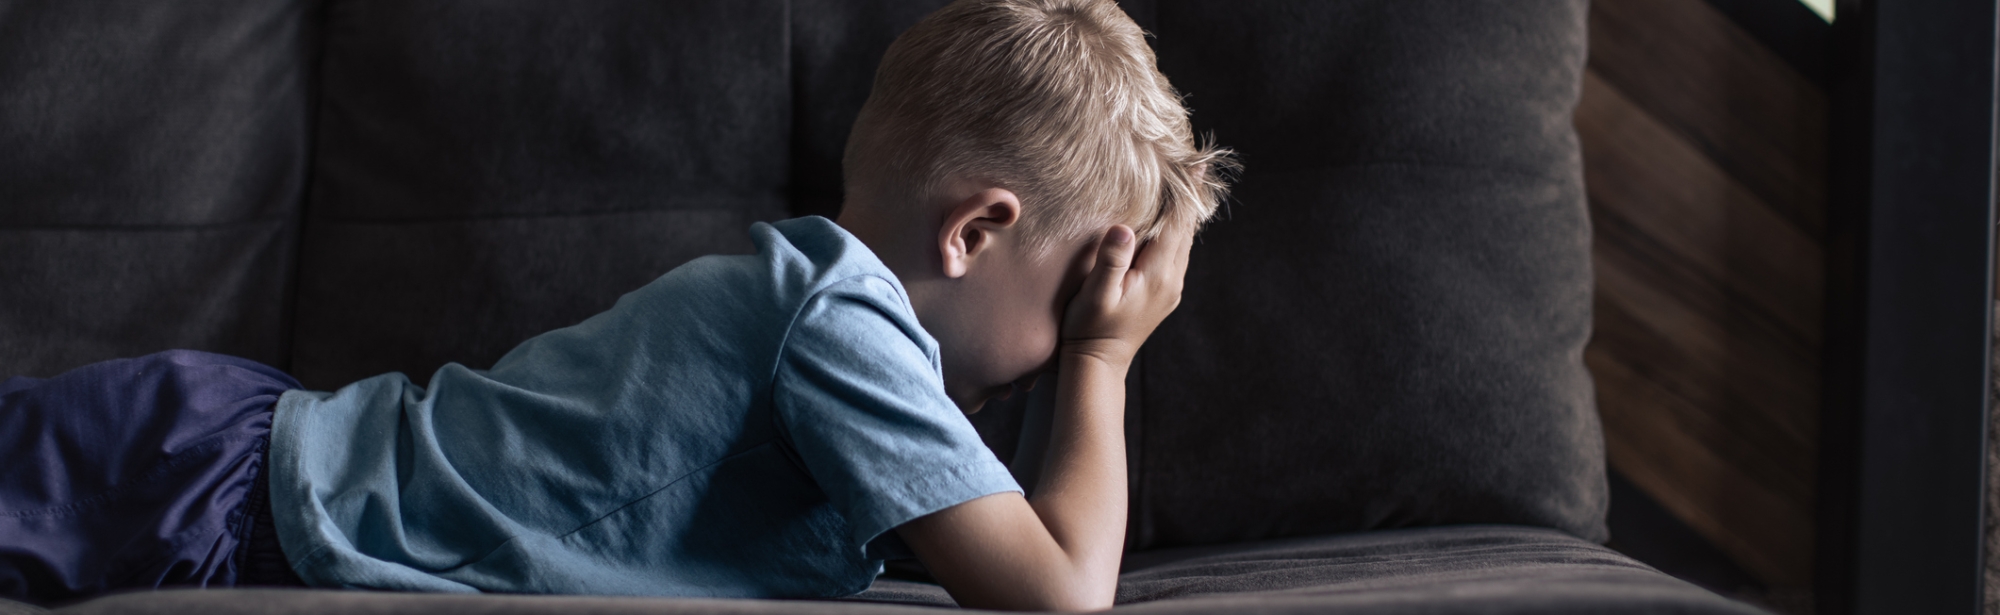 Young boy laying on couch alone, crying with hands over face